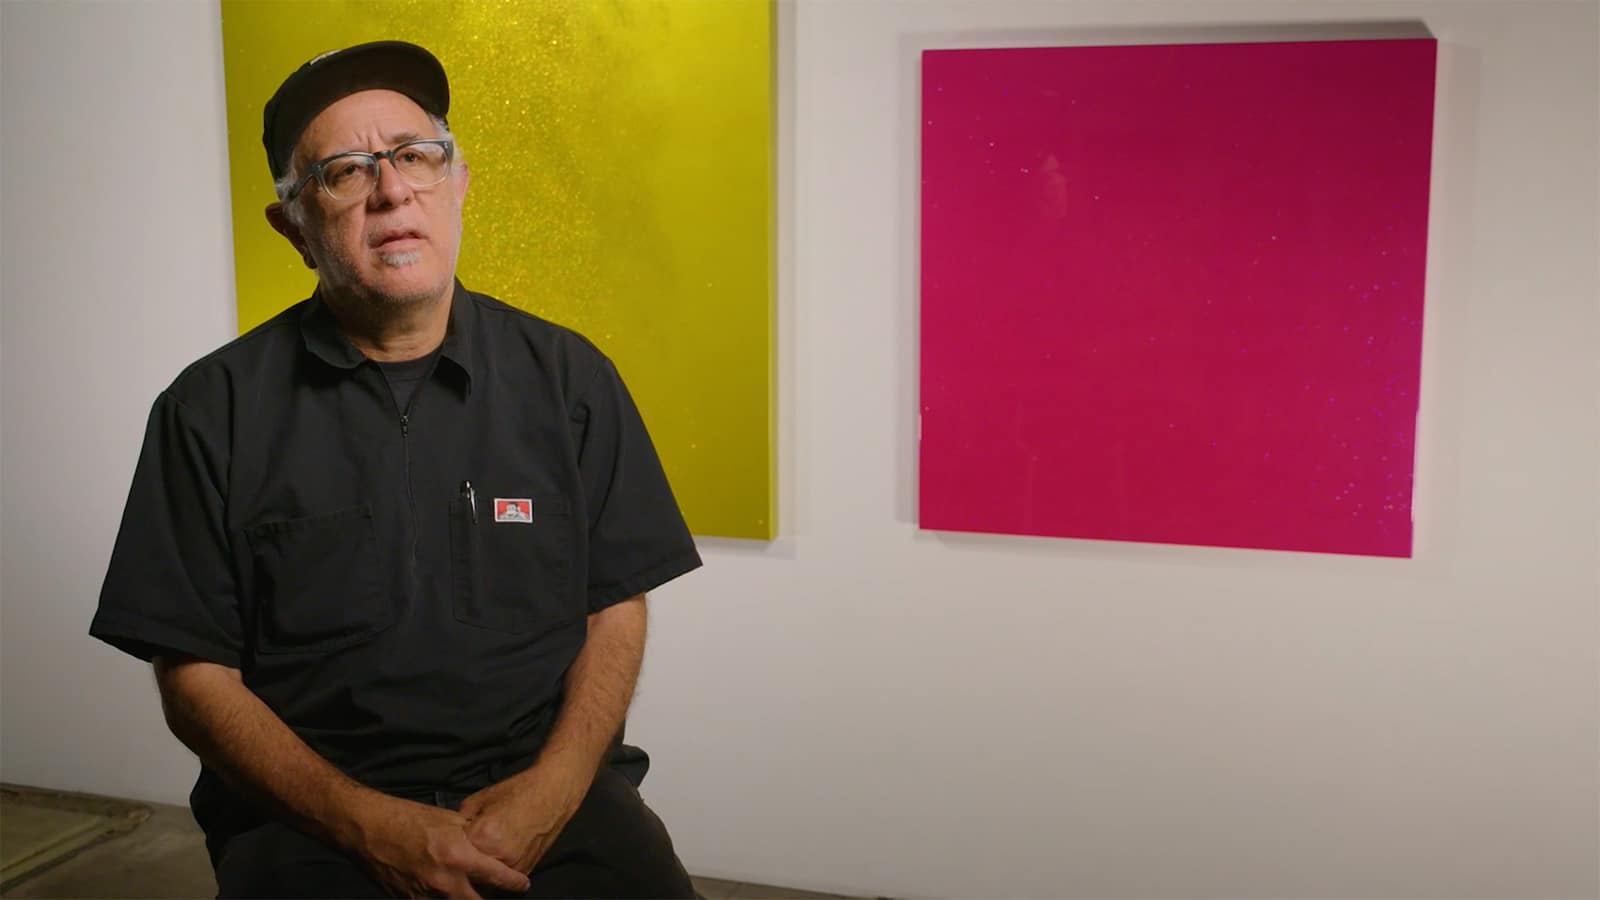 Ruben Ortiz-Torres folds hands in lap, seated in front of gallery wall with bright gold and magenta canvases